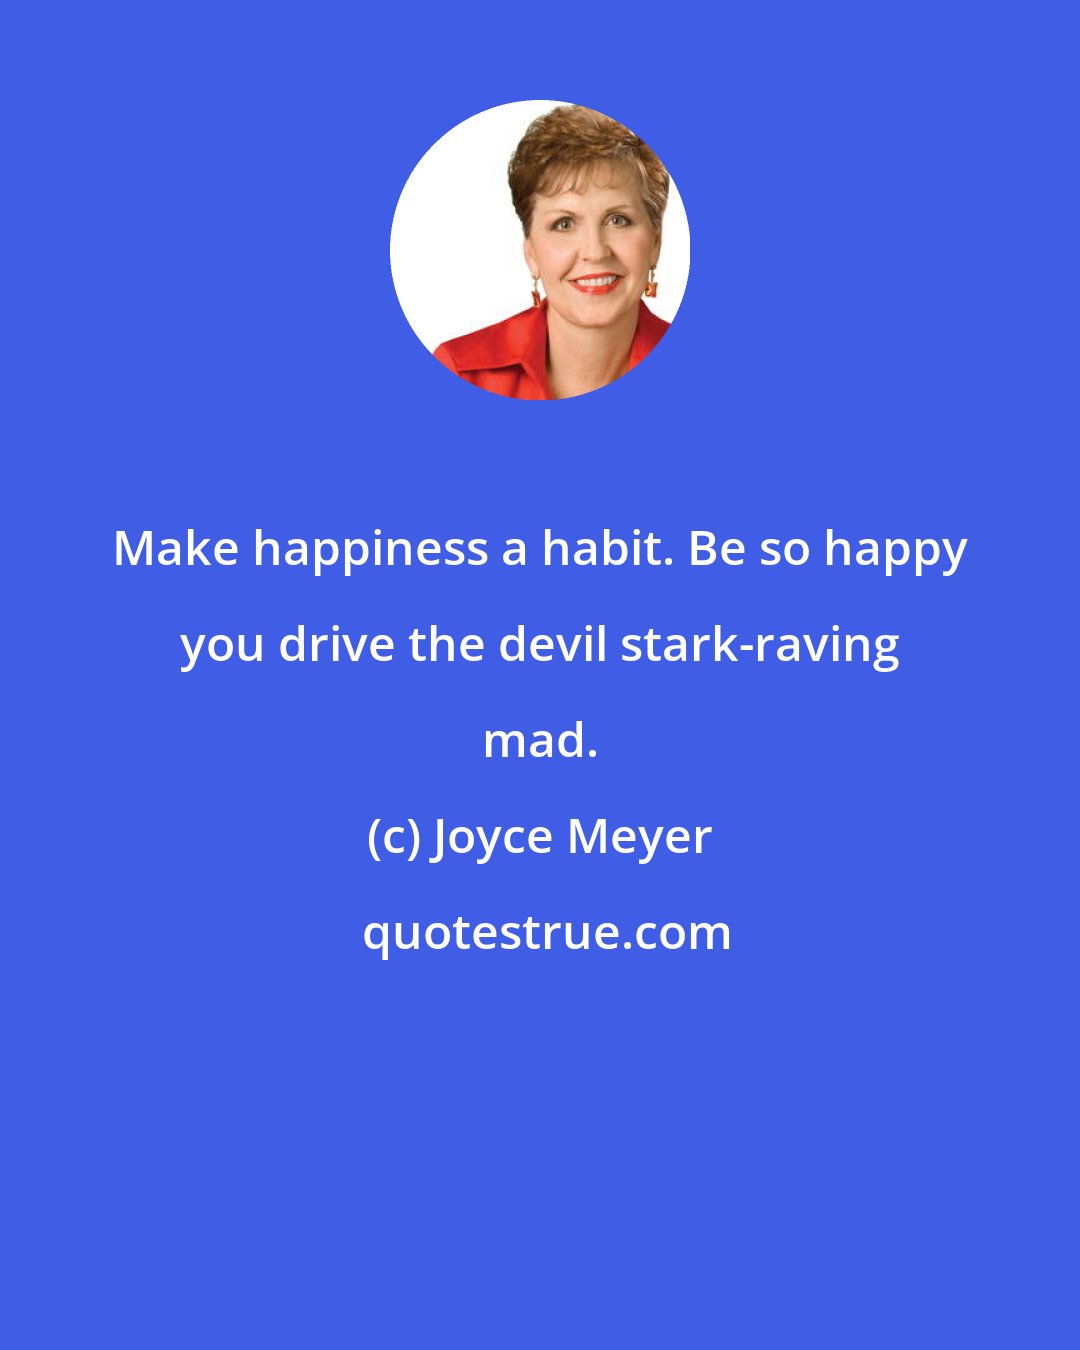 Joyce Meyer: Make happiness a habit. Be so happy you drive the devil stark-raving mad.